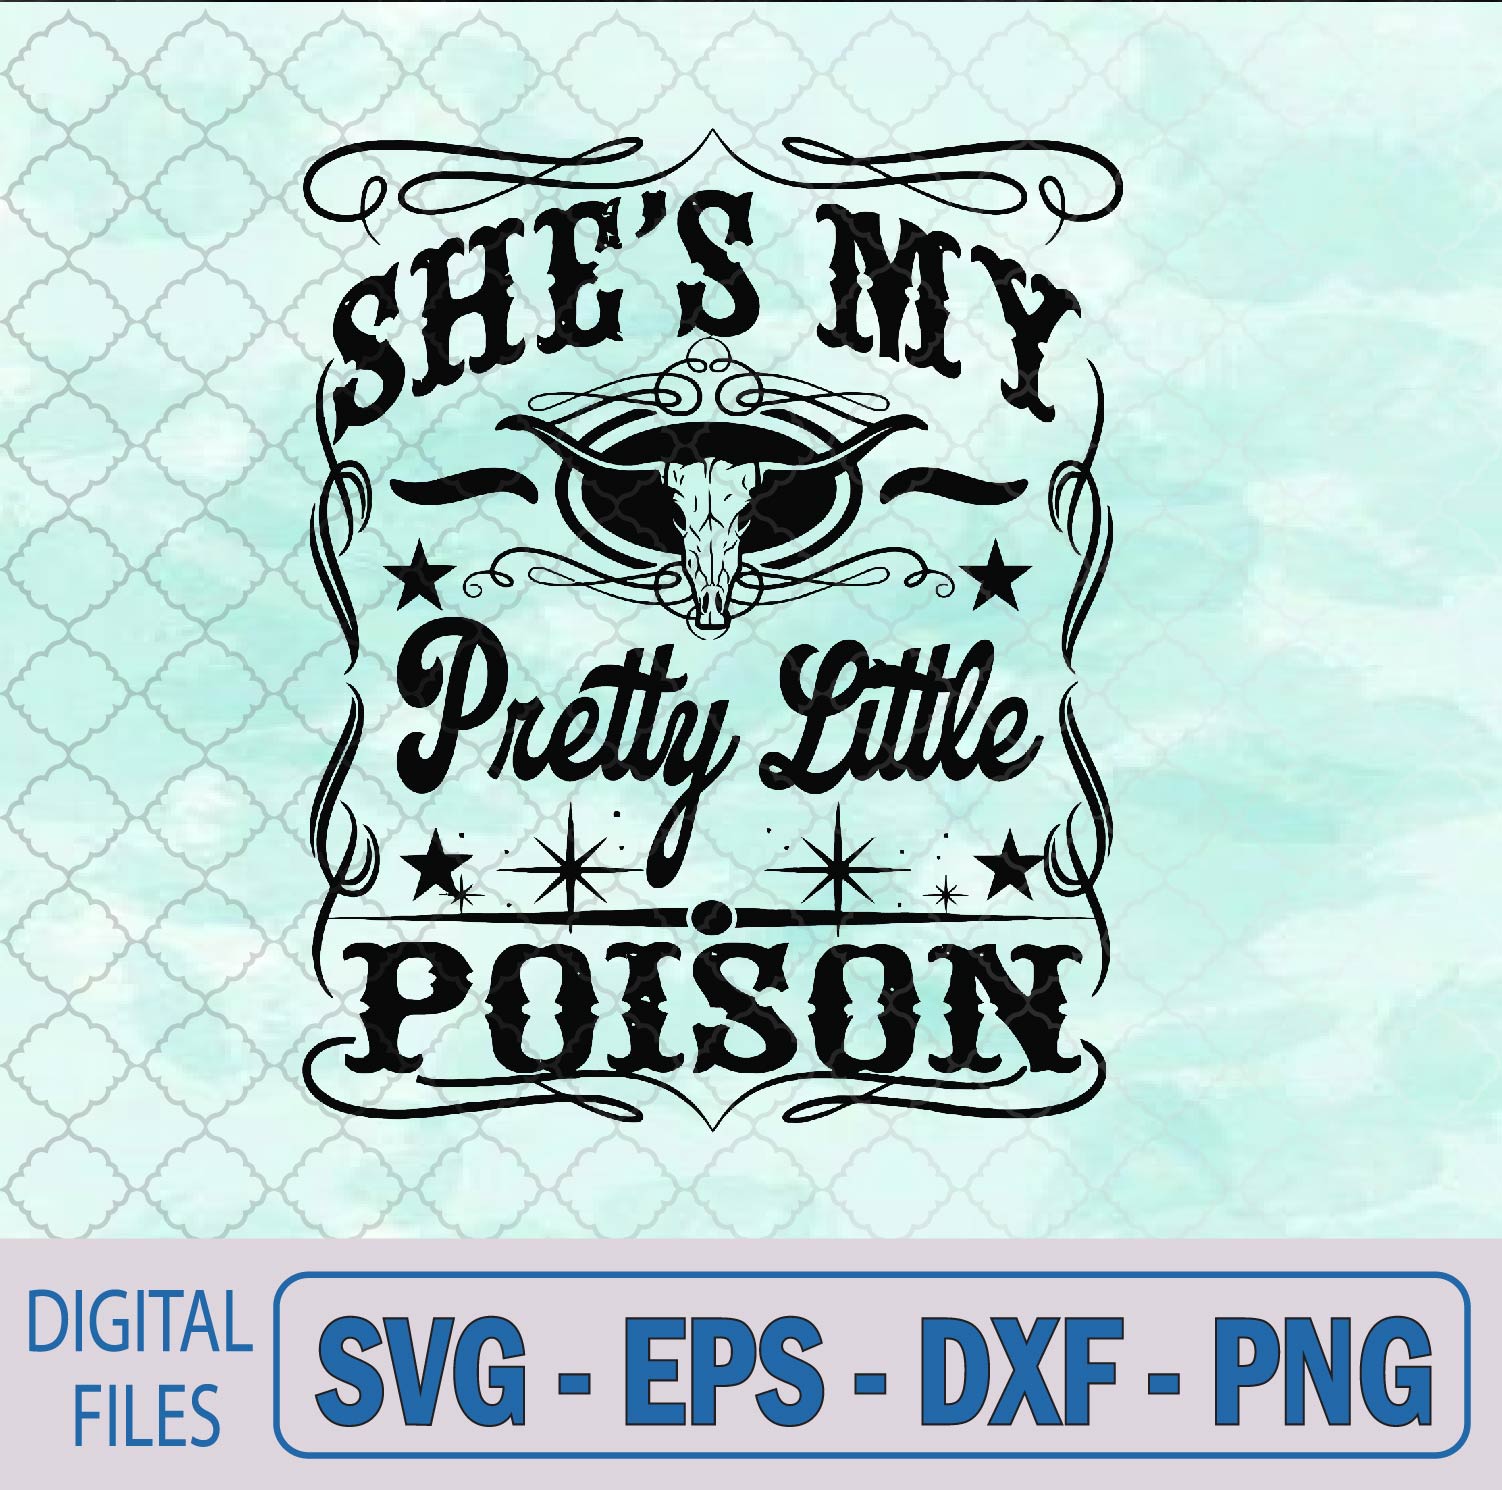 WTMNEW9file 09 242 She's My Pretty Little Poison Country Music Retro Cowgirl Svg, Png, Digital Download